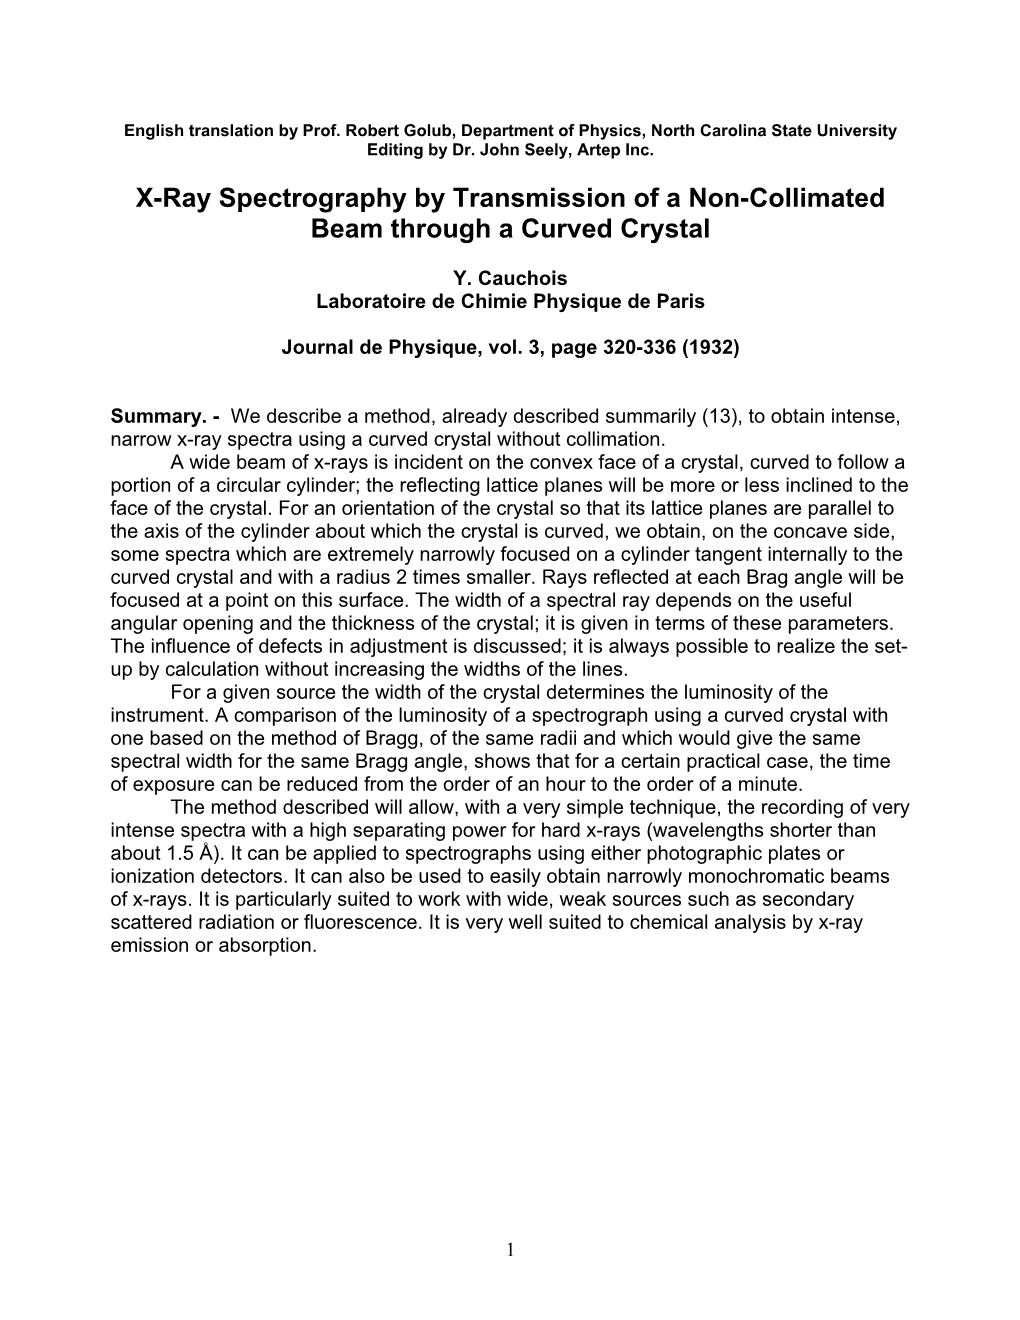 X-Ray Spectrography by Transmission of a Non-Collimated Beam Through a Curved Crystal